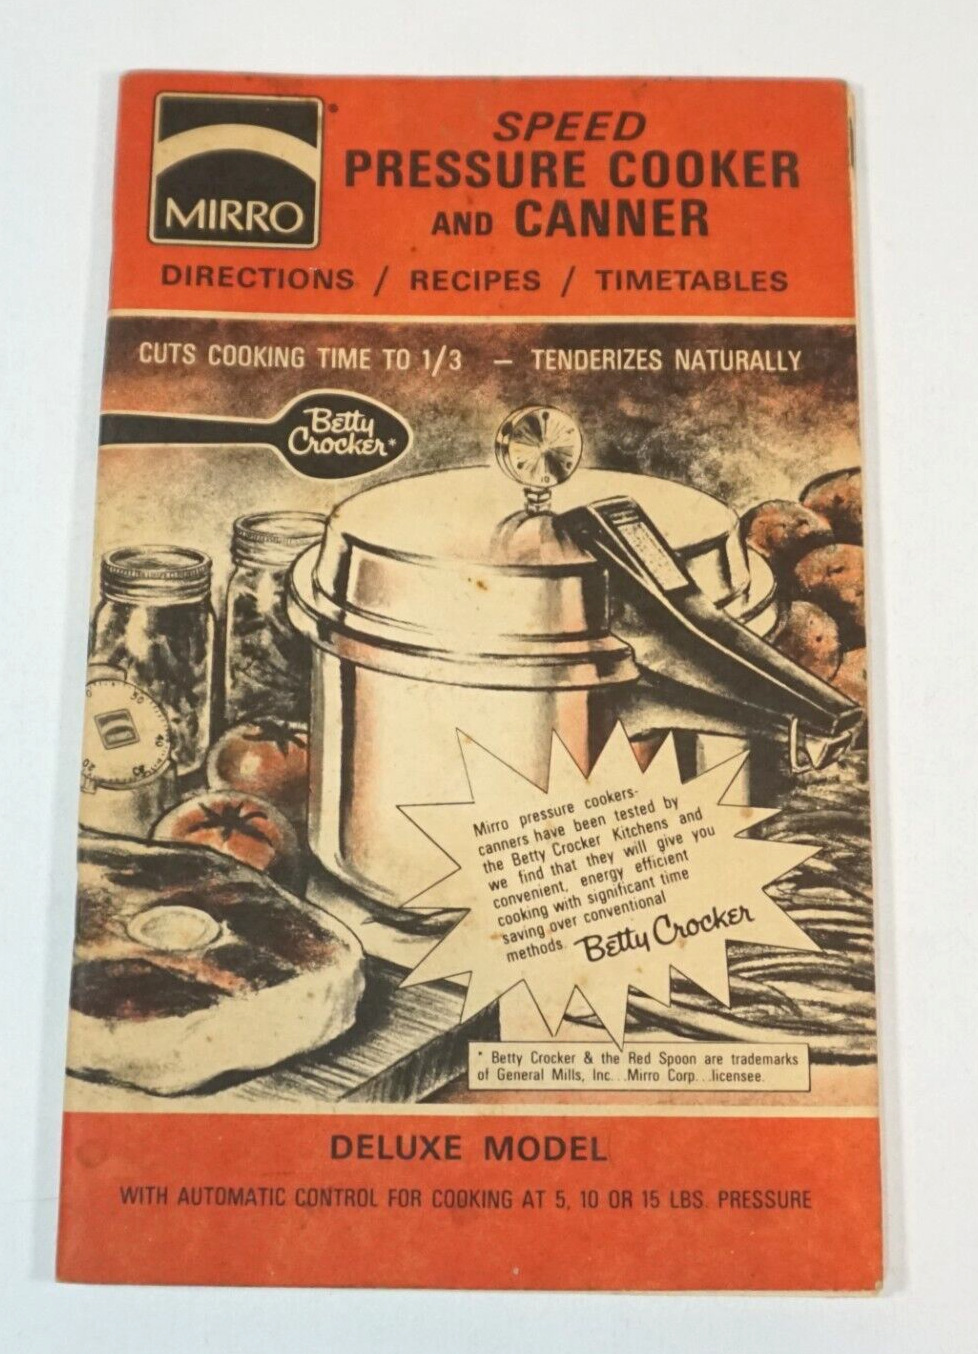 Mirro Speed Pressure Cooker Canner Directions Recipes Timetables Parts List